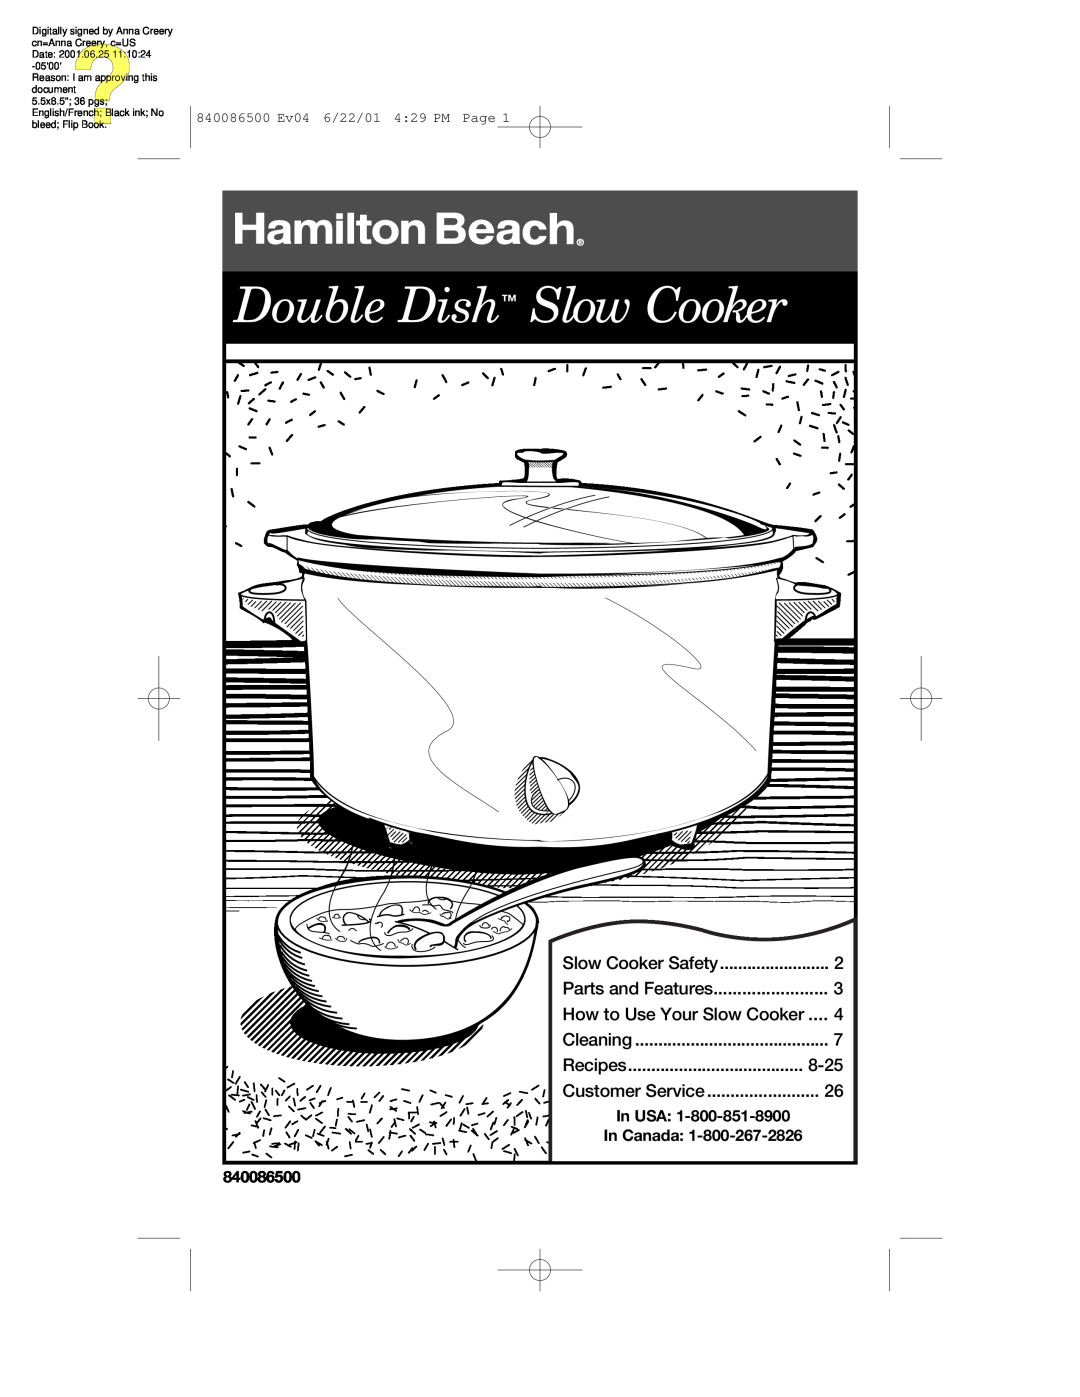 Hamilton Beach 33158 manual Double Dish Slow Cooker, Slow Cooker Safety, Parts and Features, Cleaning, Recipes, In USA 